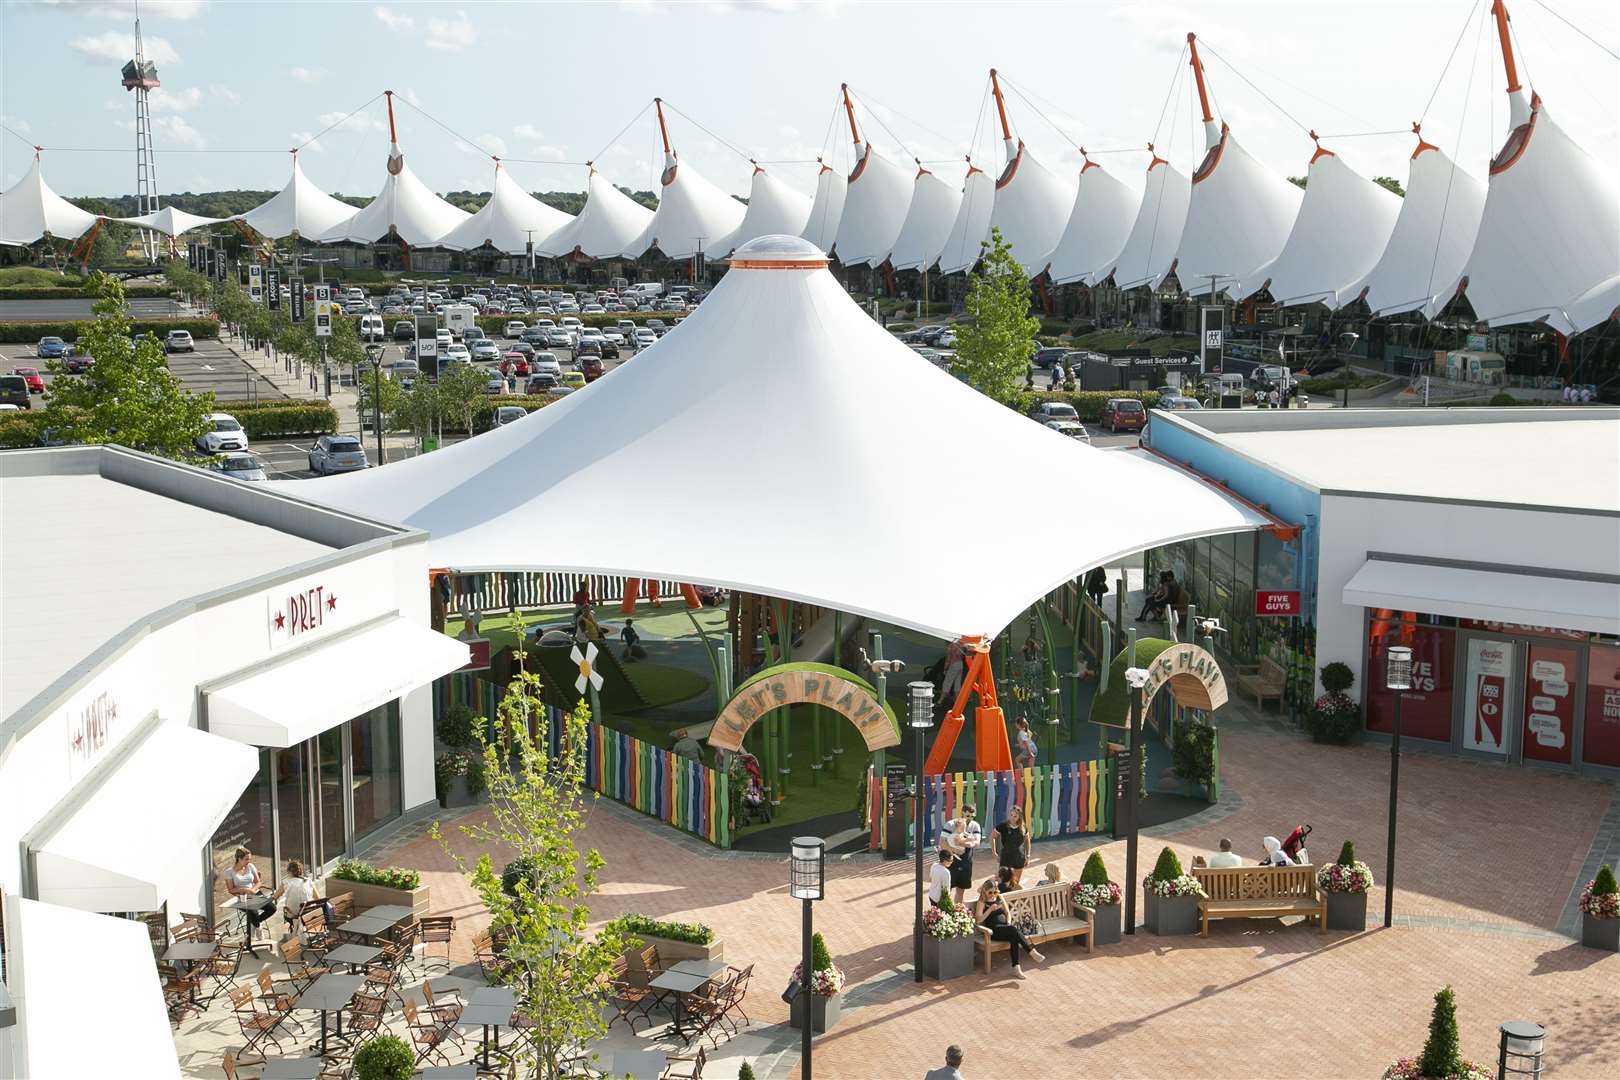 The other Kent Joules location is at the Ashford Designer Outlet